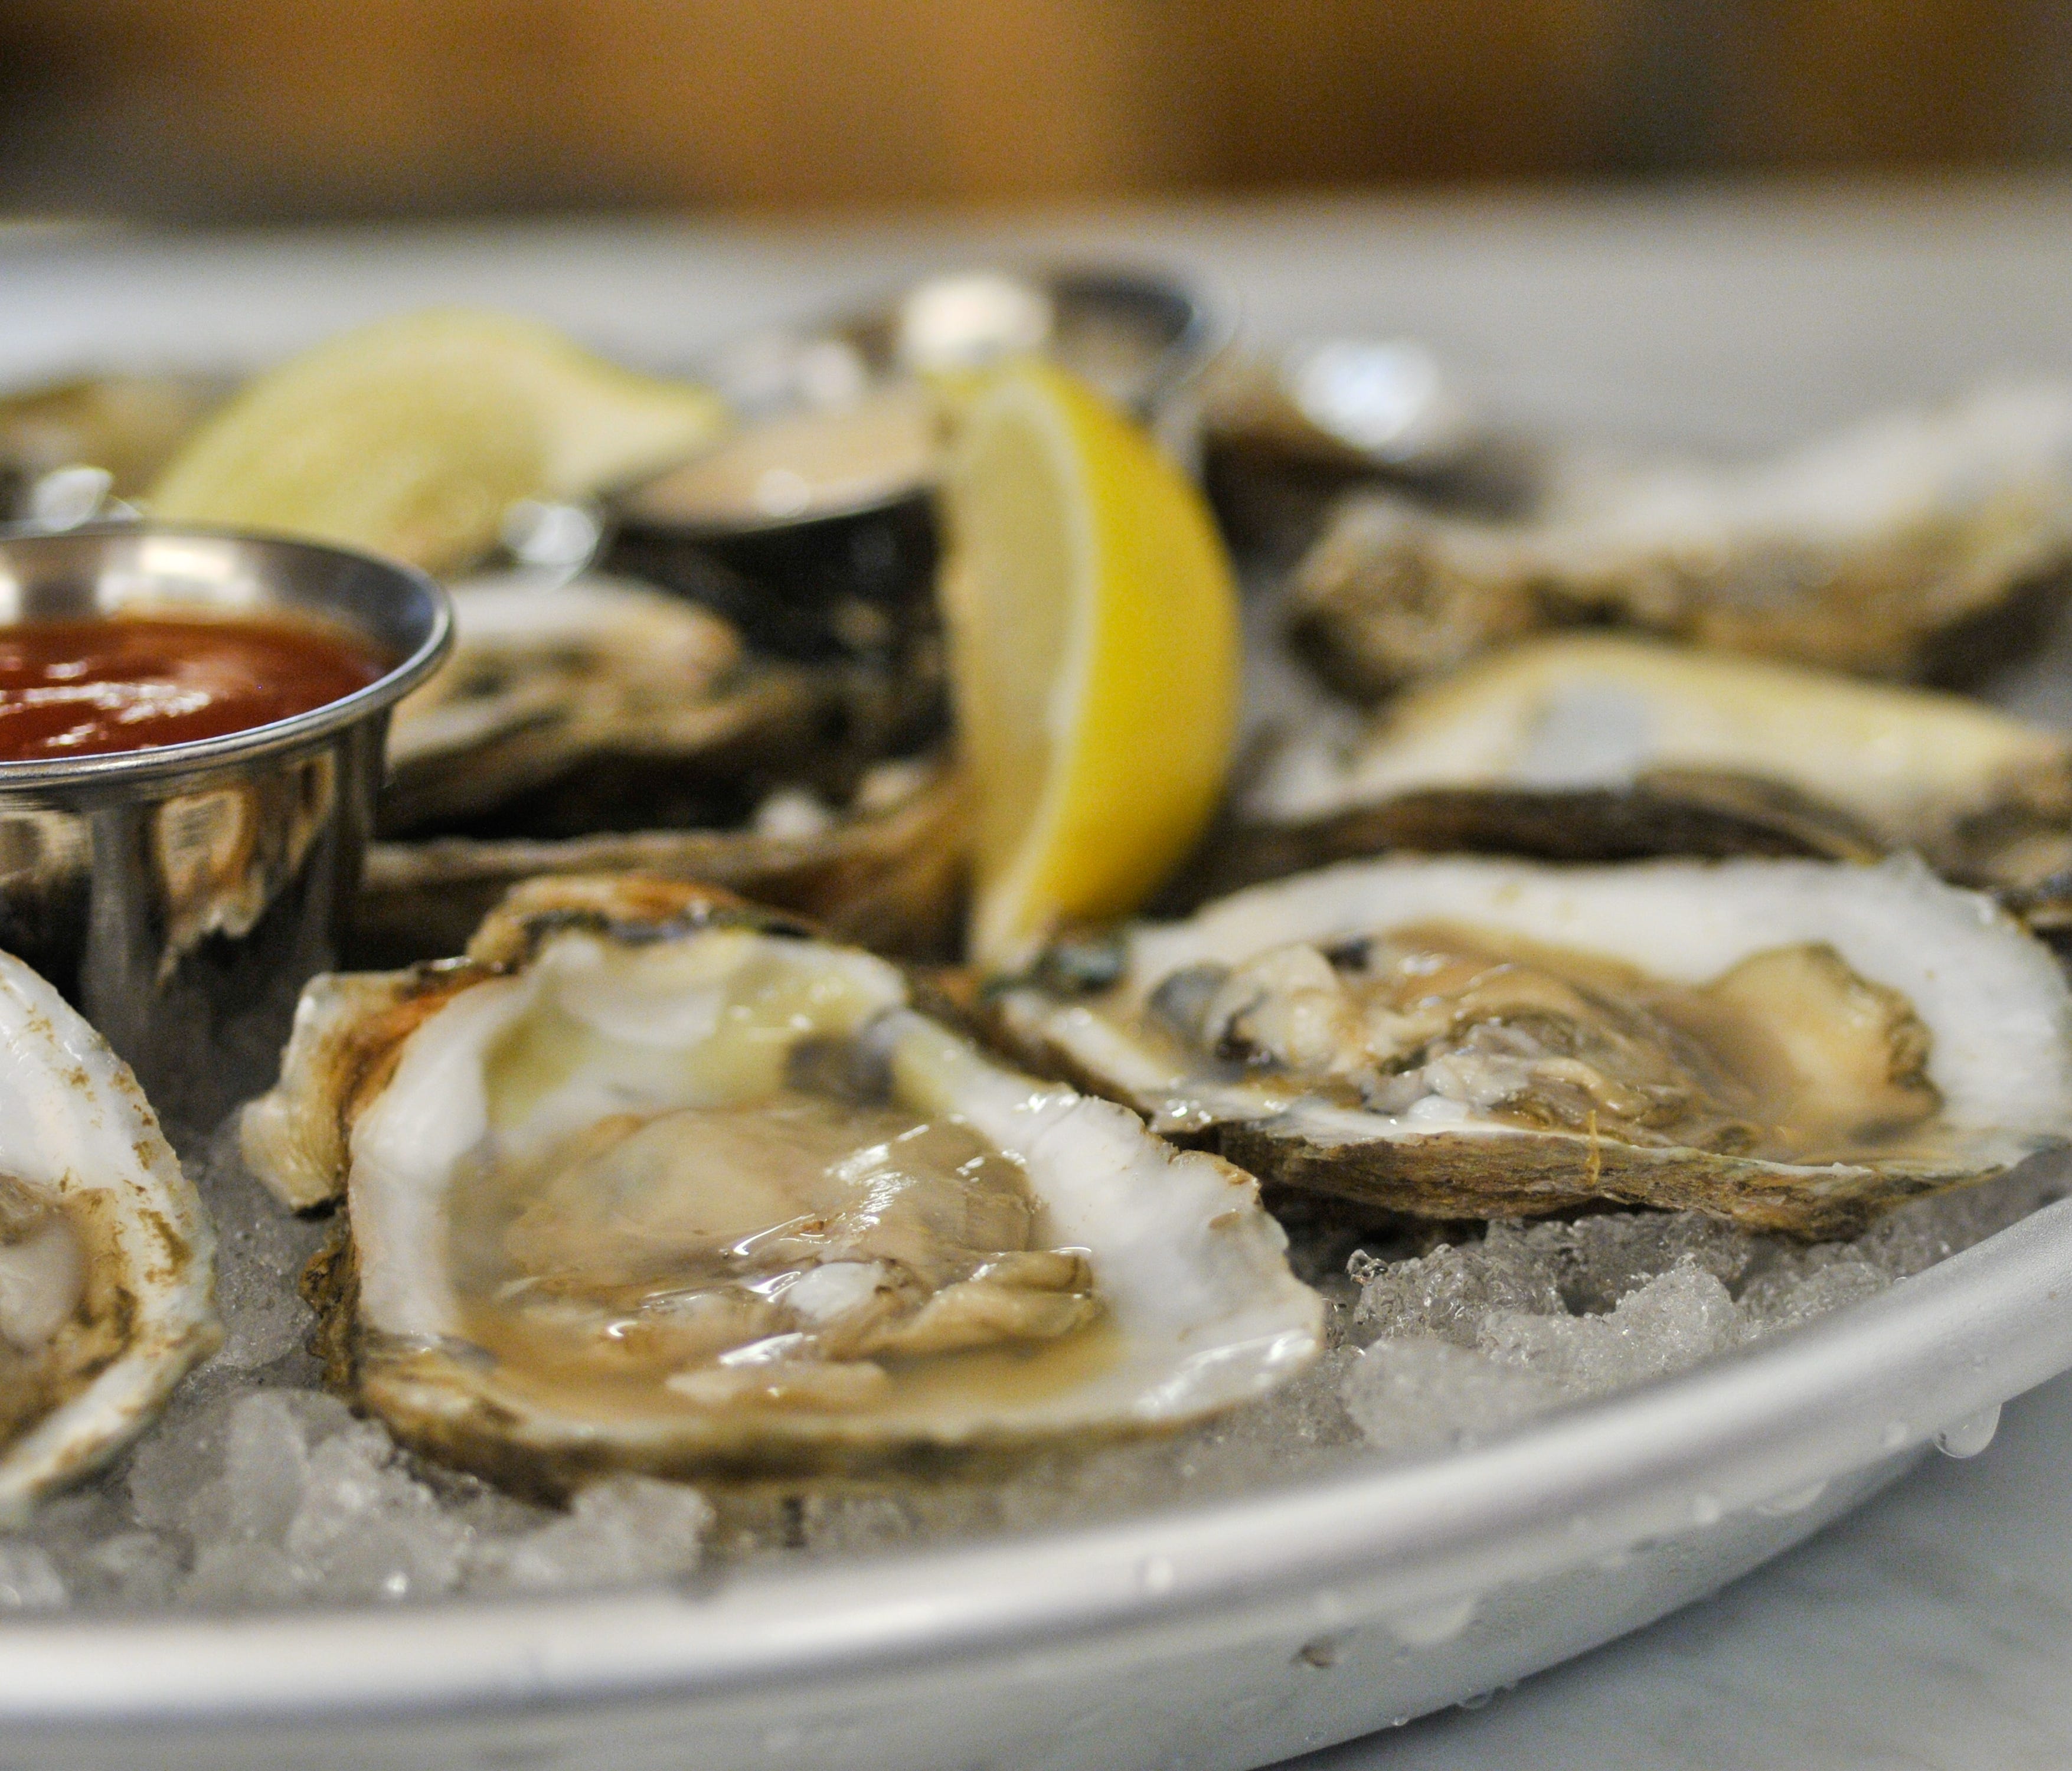 A dozen Gulf oysters will set you back just $6; they're 50-cents apiece everyday from 4 p.m. to 6:30 p.m. The bivalves at Superior are locally sourced and delivered daily from nearby St. Bernard Parish, La.